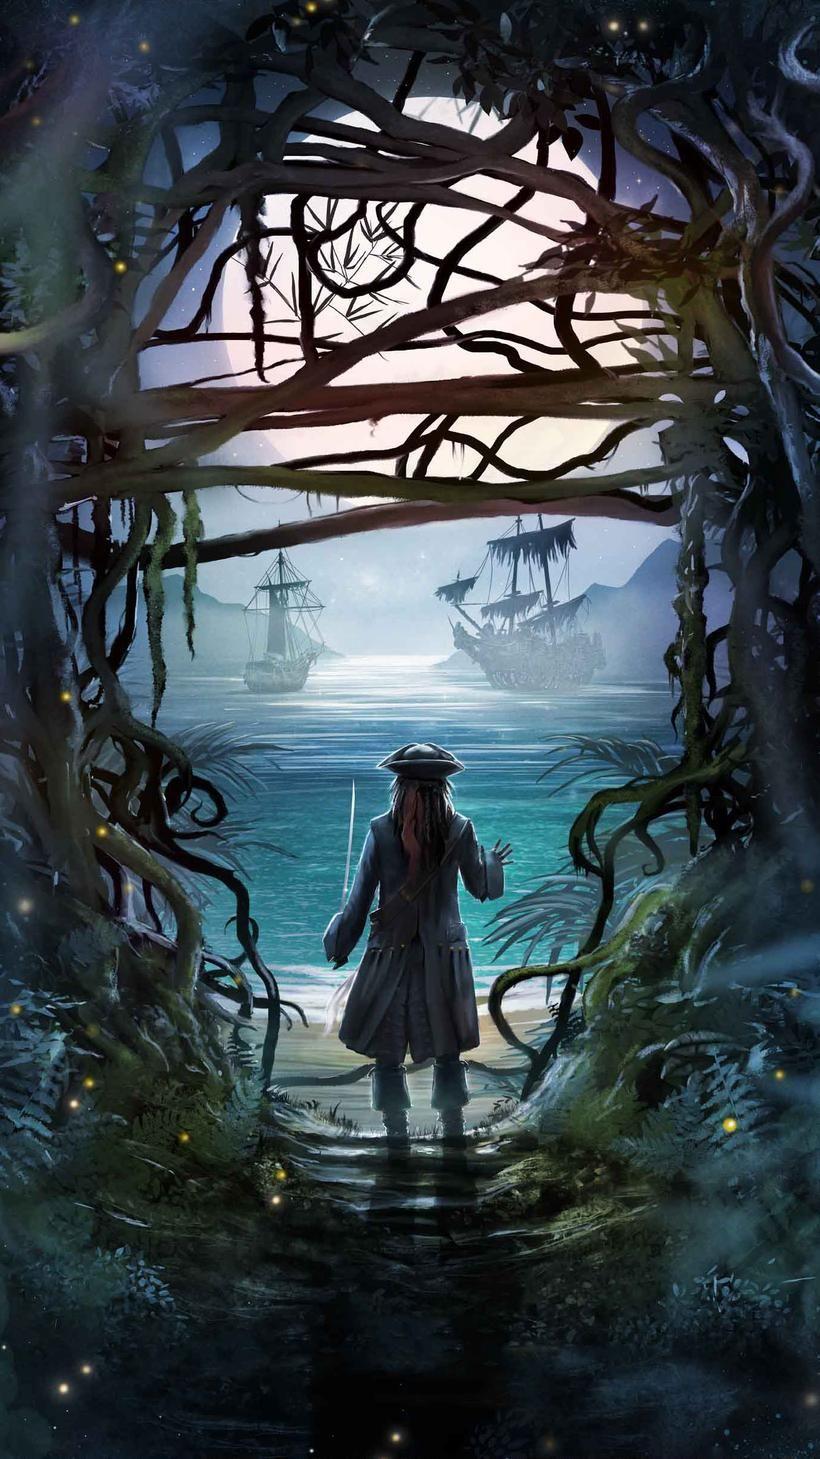 Jack Sparrow Quotes, Funny Of The Caribbean Dead Men